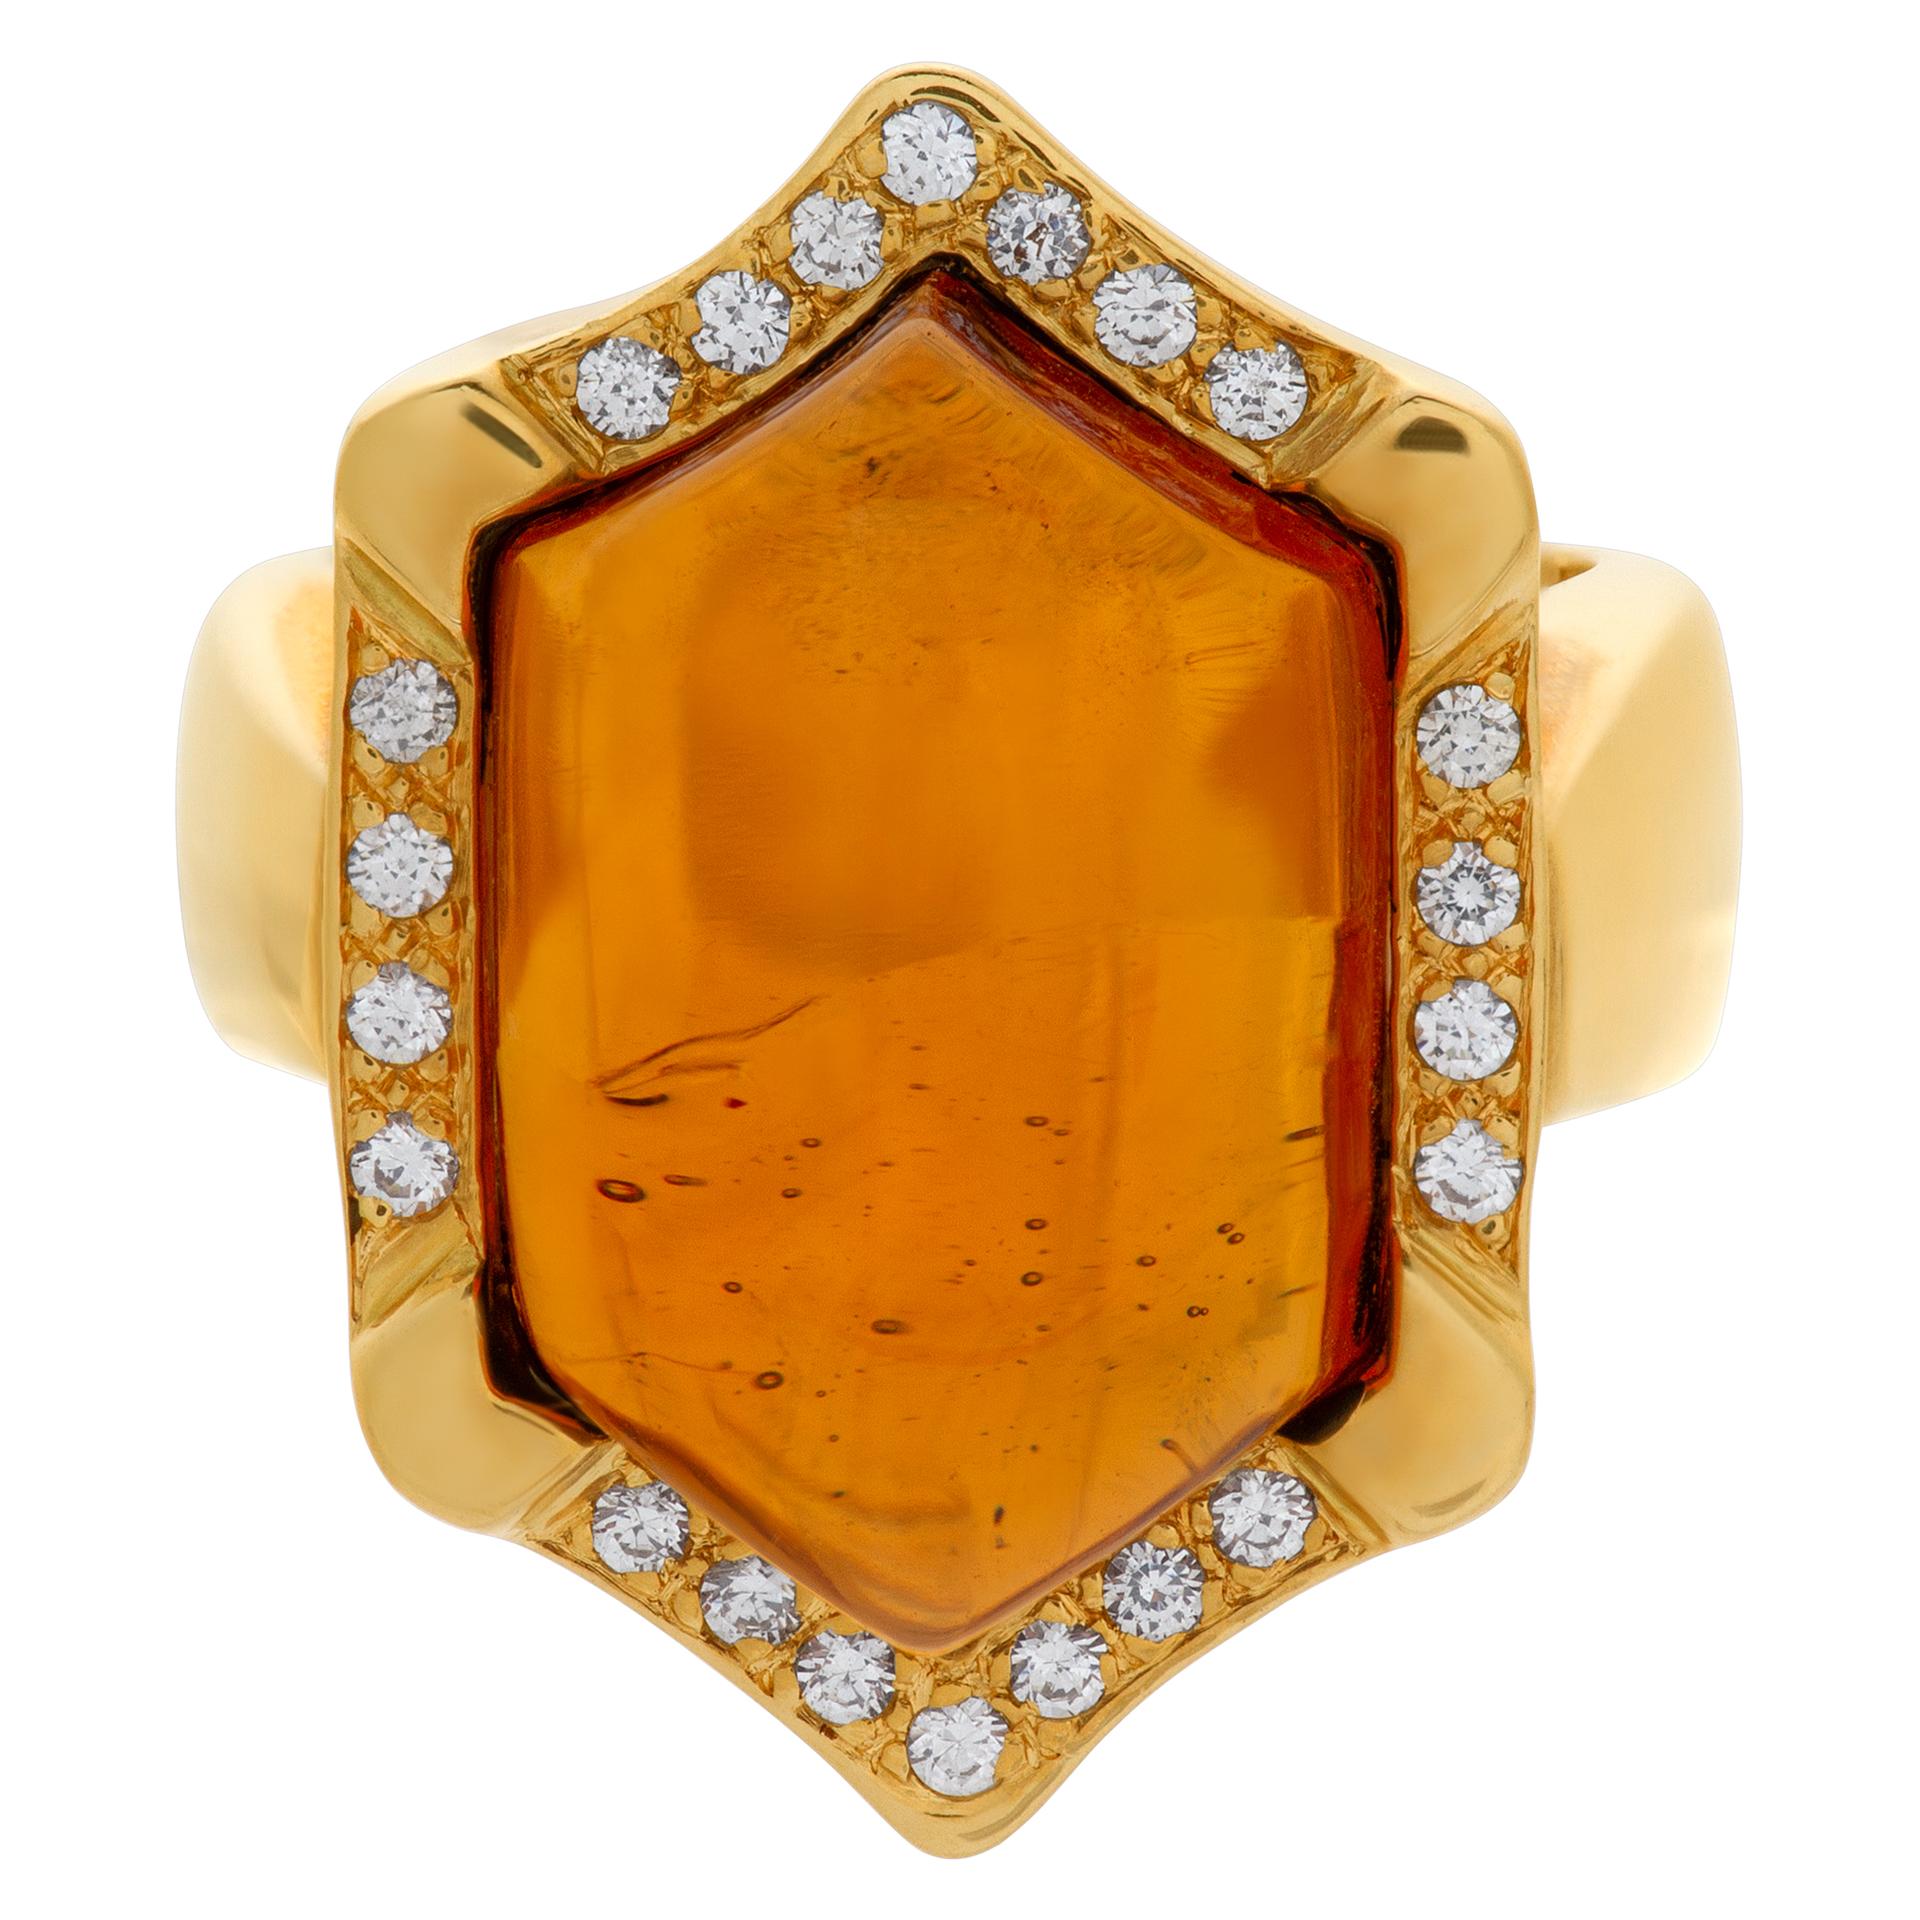 Elegant ring with hexagonal cabochon Madeira Citrine & approximately 0.20 carats in round G-H color, VS clarity diamonds set in 18k yellow gold. Size 4.75.  This Citrine ring is currently size 4.75 and some items can be sized up or down, please ask!